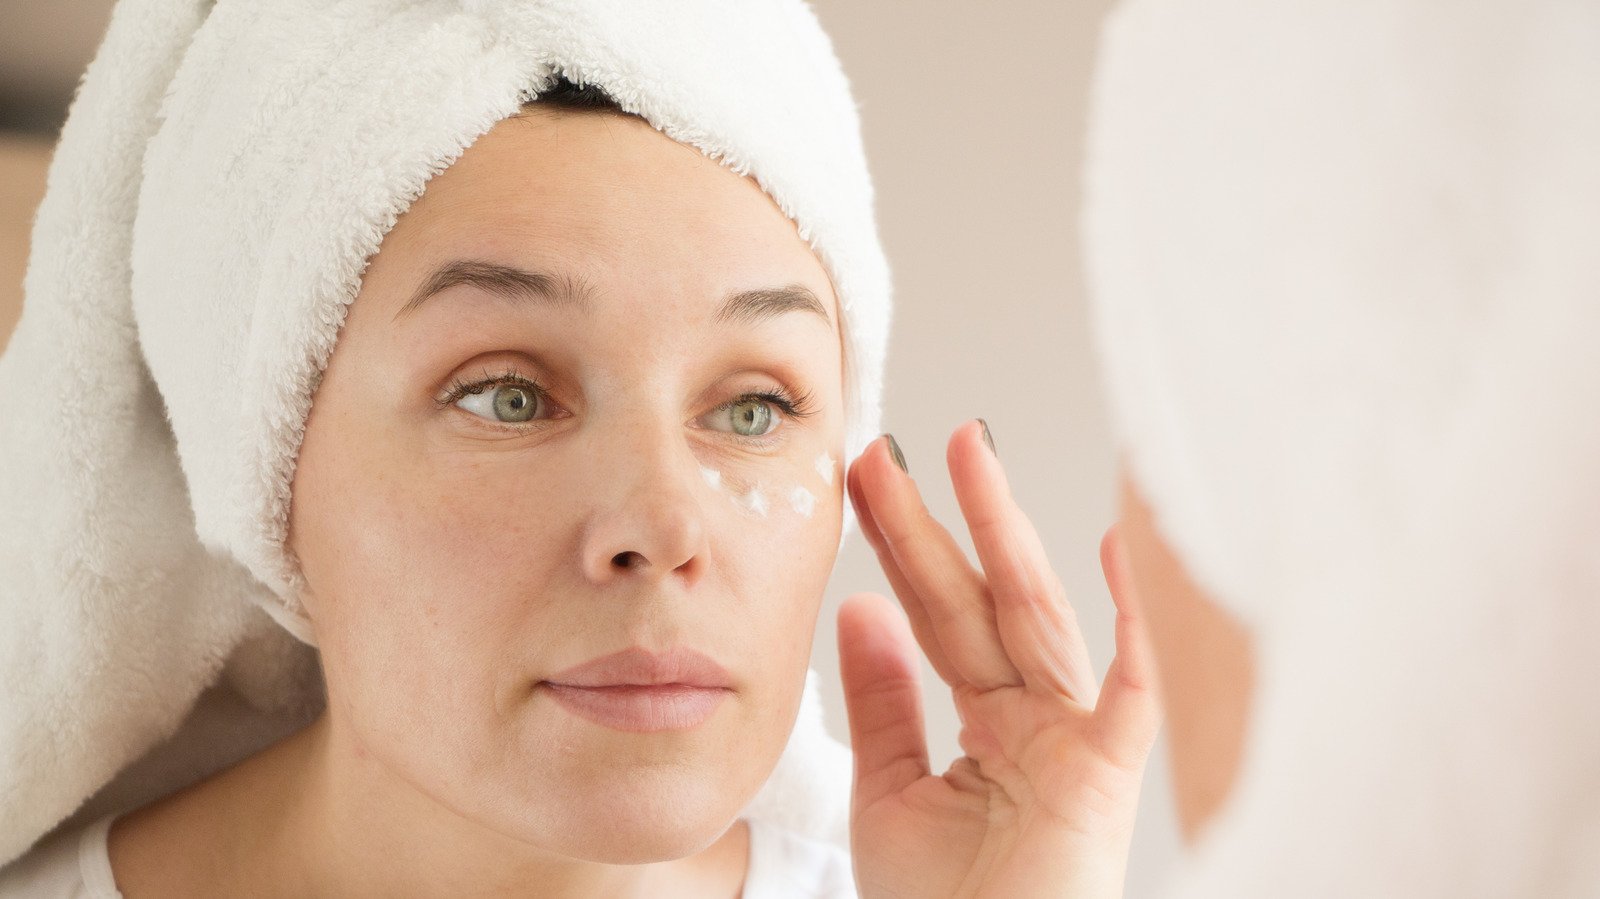 Top 5 Ingredients to Avoid if You Have Oily Skin